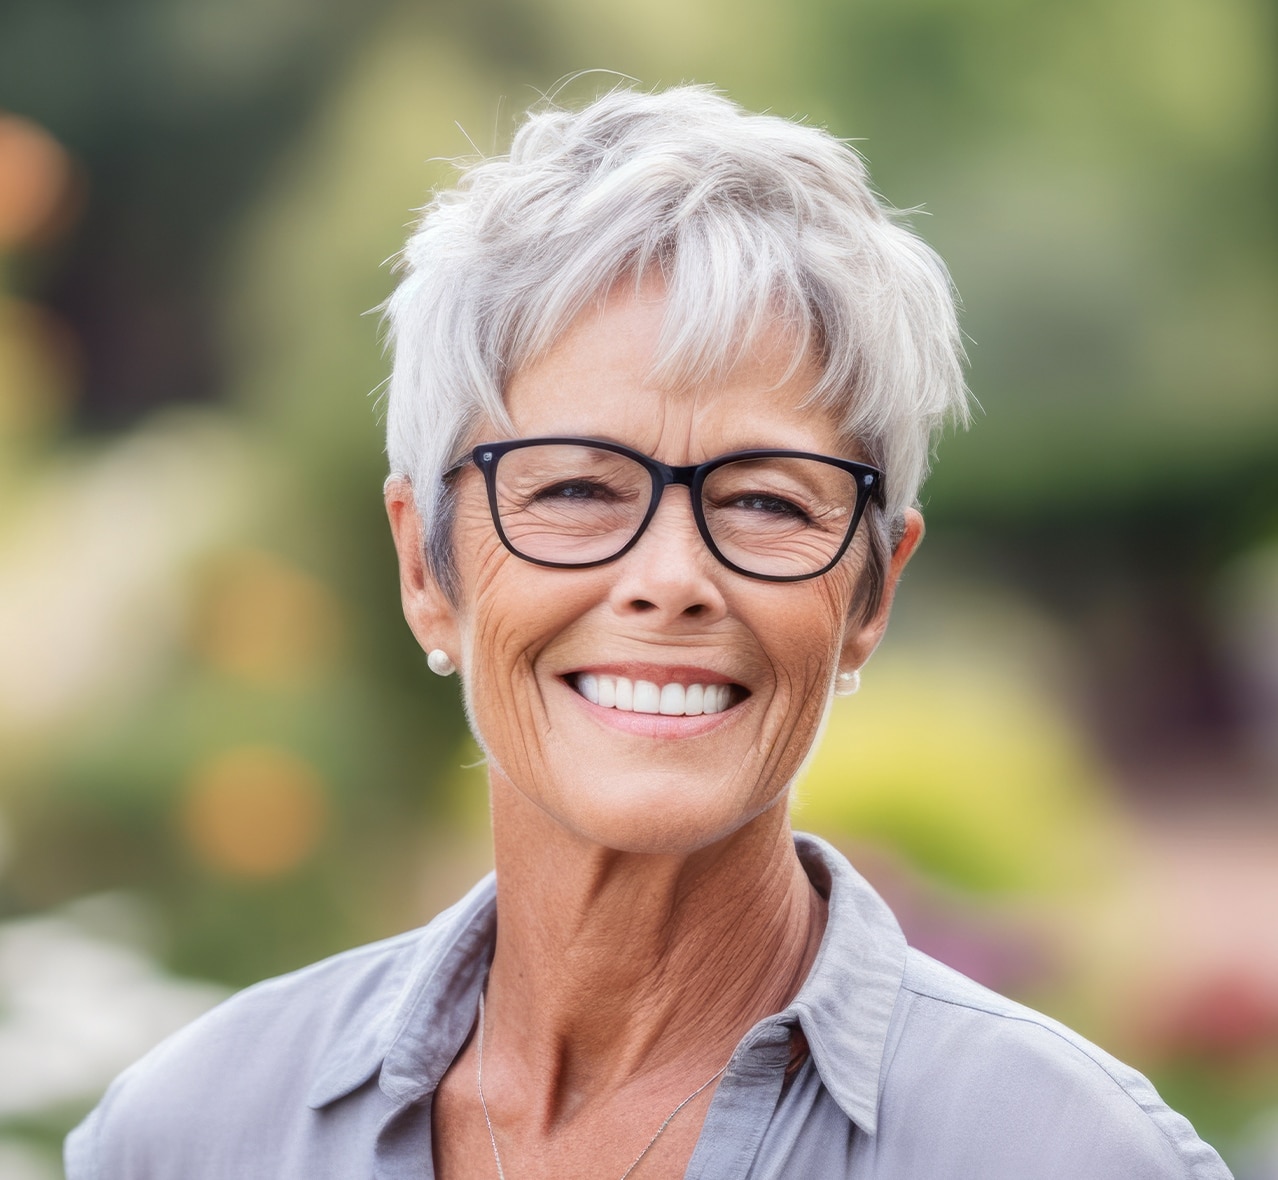 A happy middle-aged woman with healthy teeth